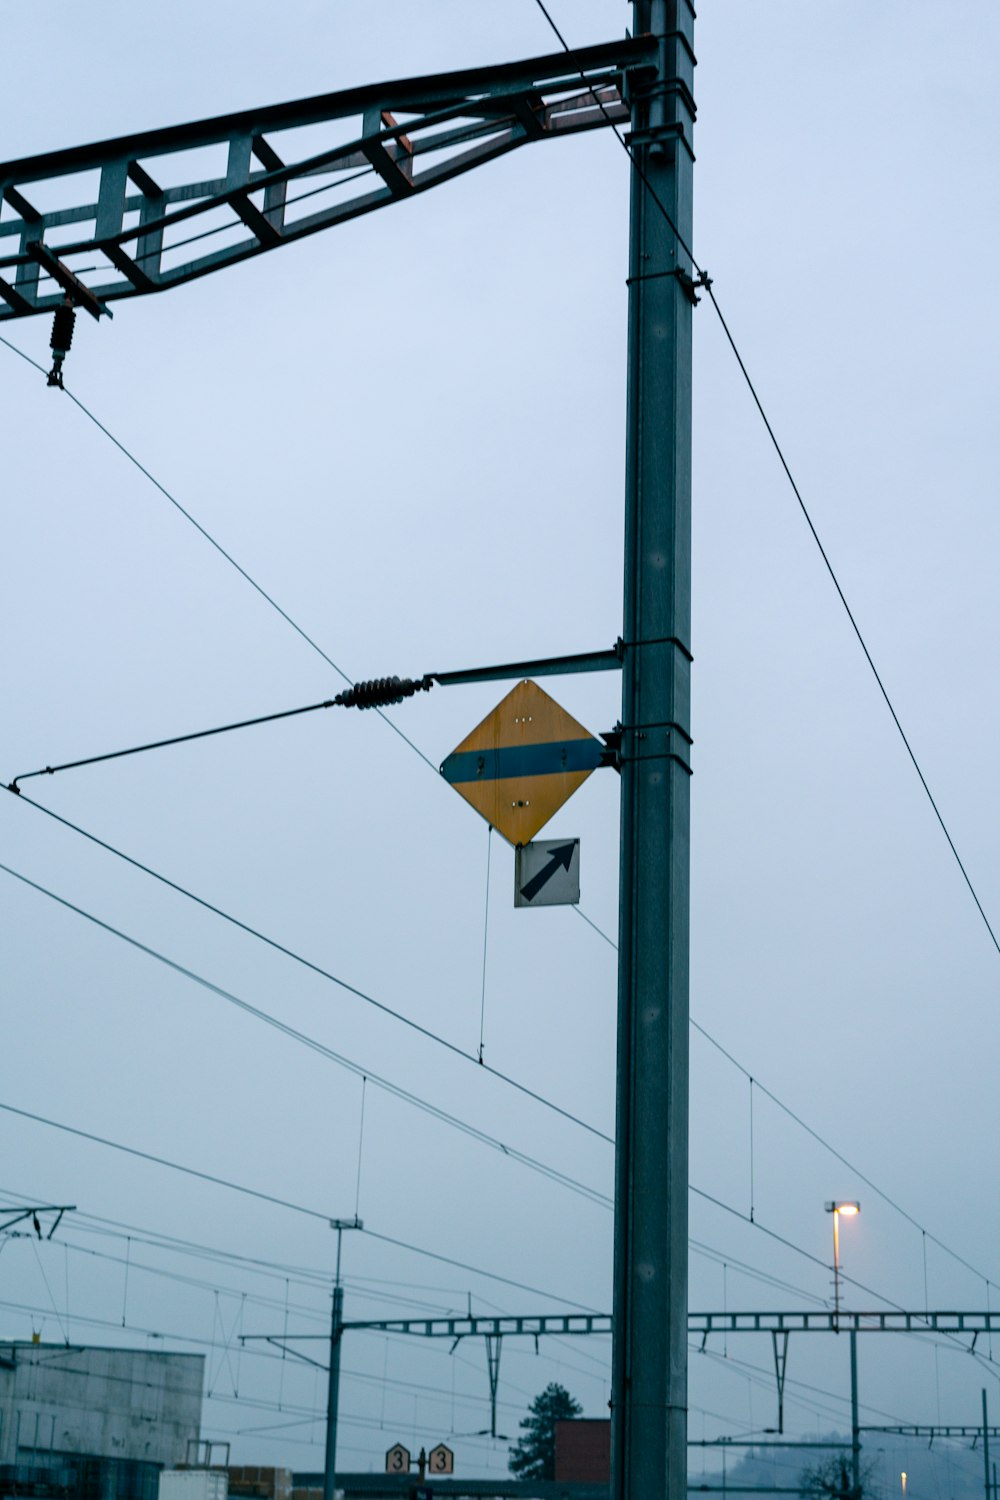 a street sign hanging from the side of a metal pole